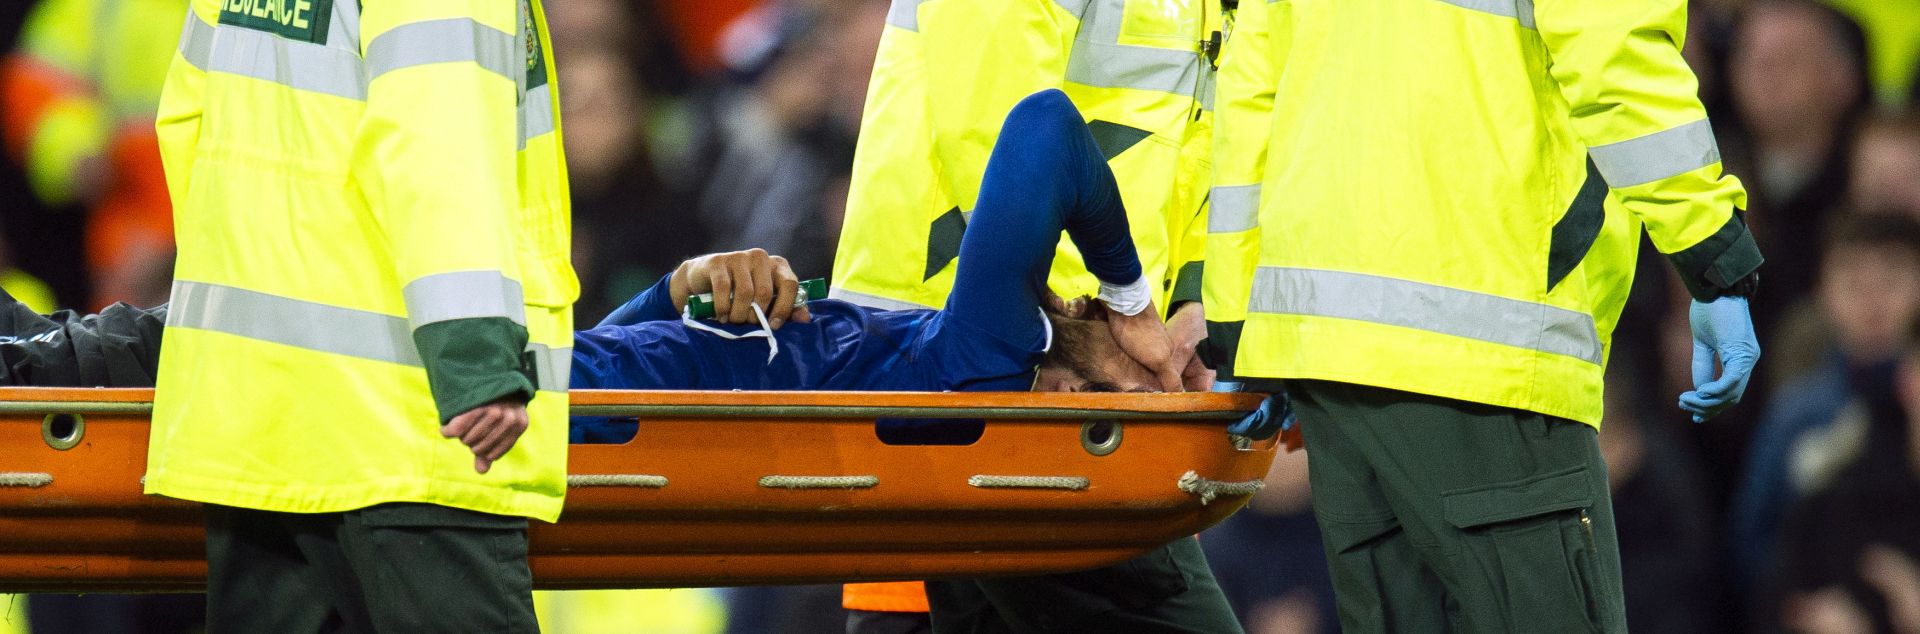 epa07970194 Everton's Andre Gomes (bottom) is stretchered off the pitch after being injured during the English Premier League soccer match between Everton FC and Tottenham Hotspur at the Goodison Park in Liverpool, Britain, 03 November 2019.  EPA/PETER POWELL EDITORIAL USE ONLY. No use with unauthorized audio, video, data, fixture lists, club/league logos or 'live' services. Online in-match use limited to 120 images, no video emulation. No use in betting, games or single club/league/player publications